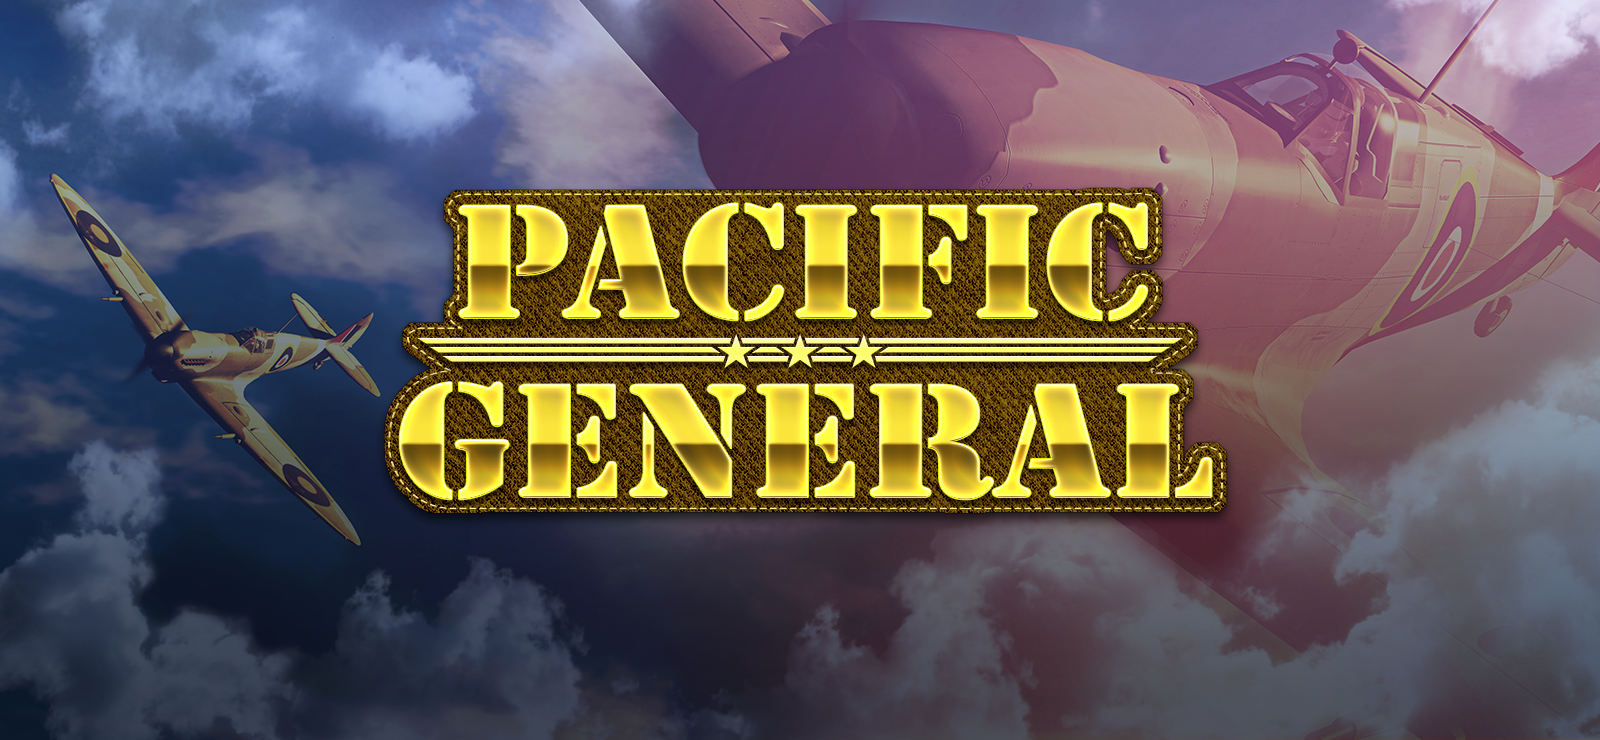 Pacific General